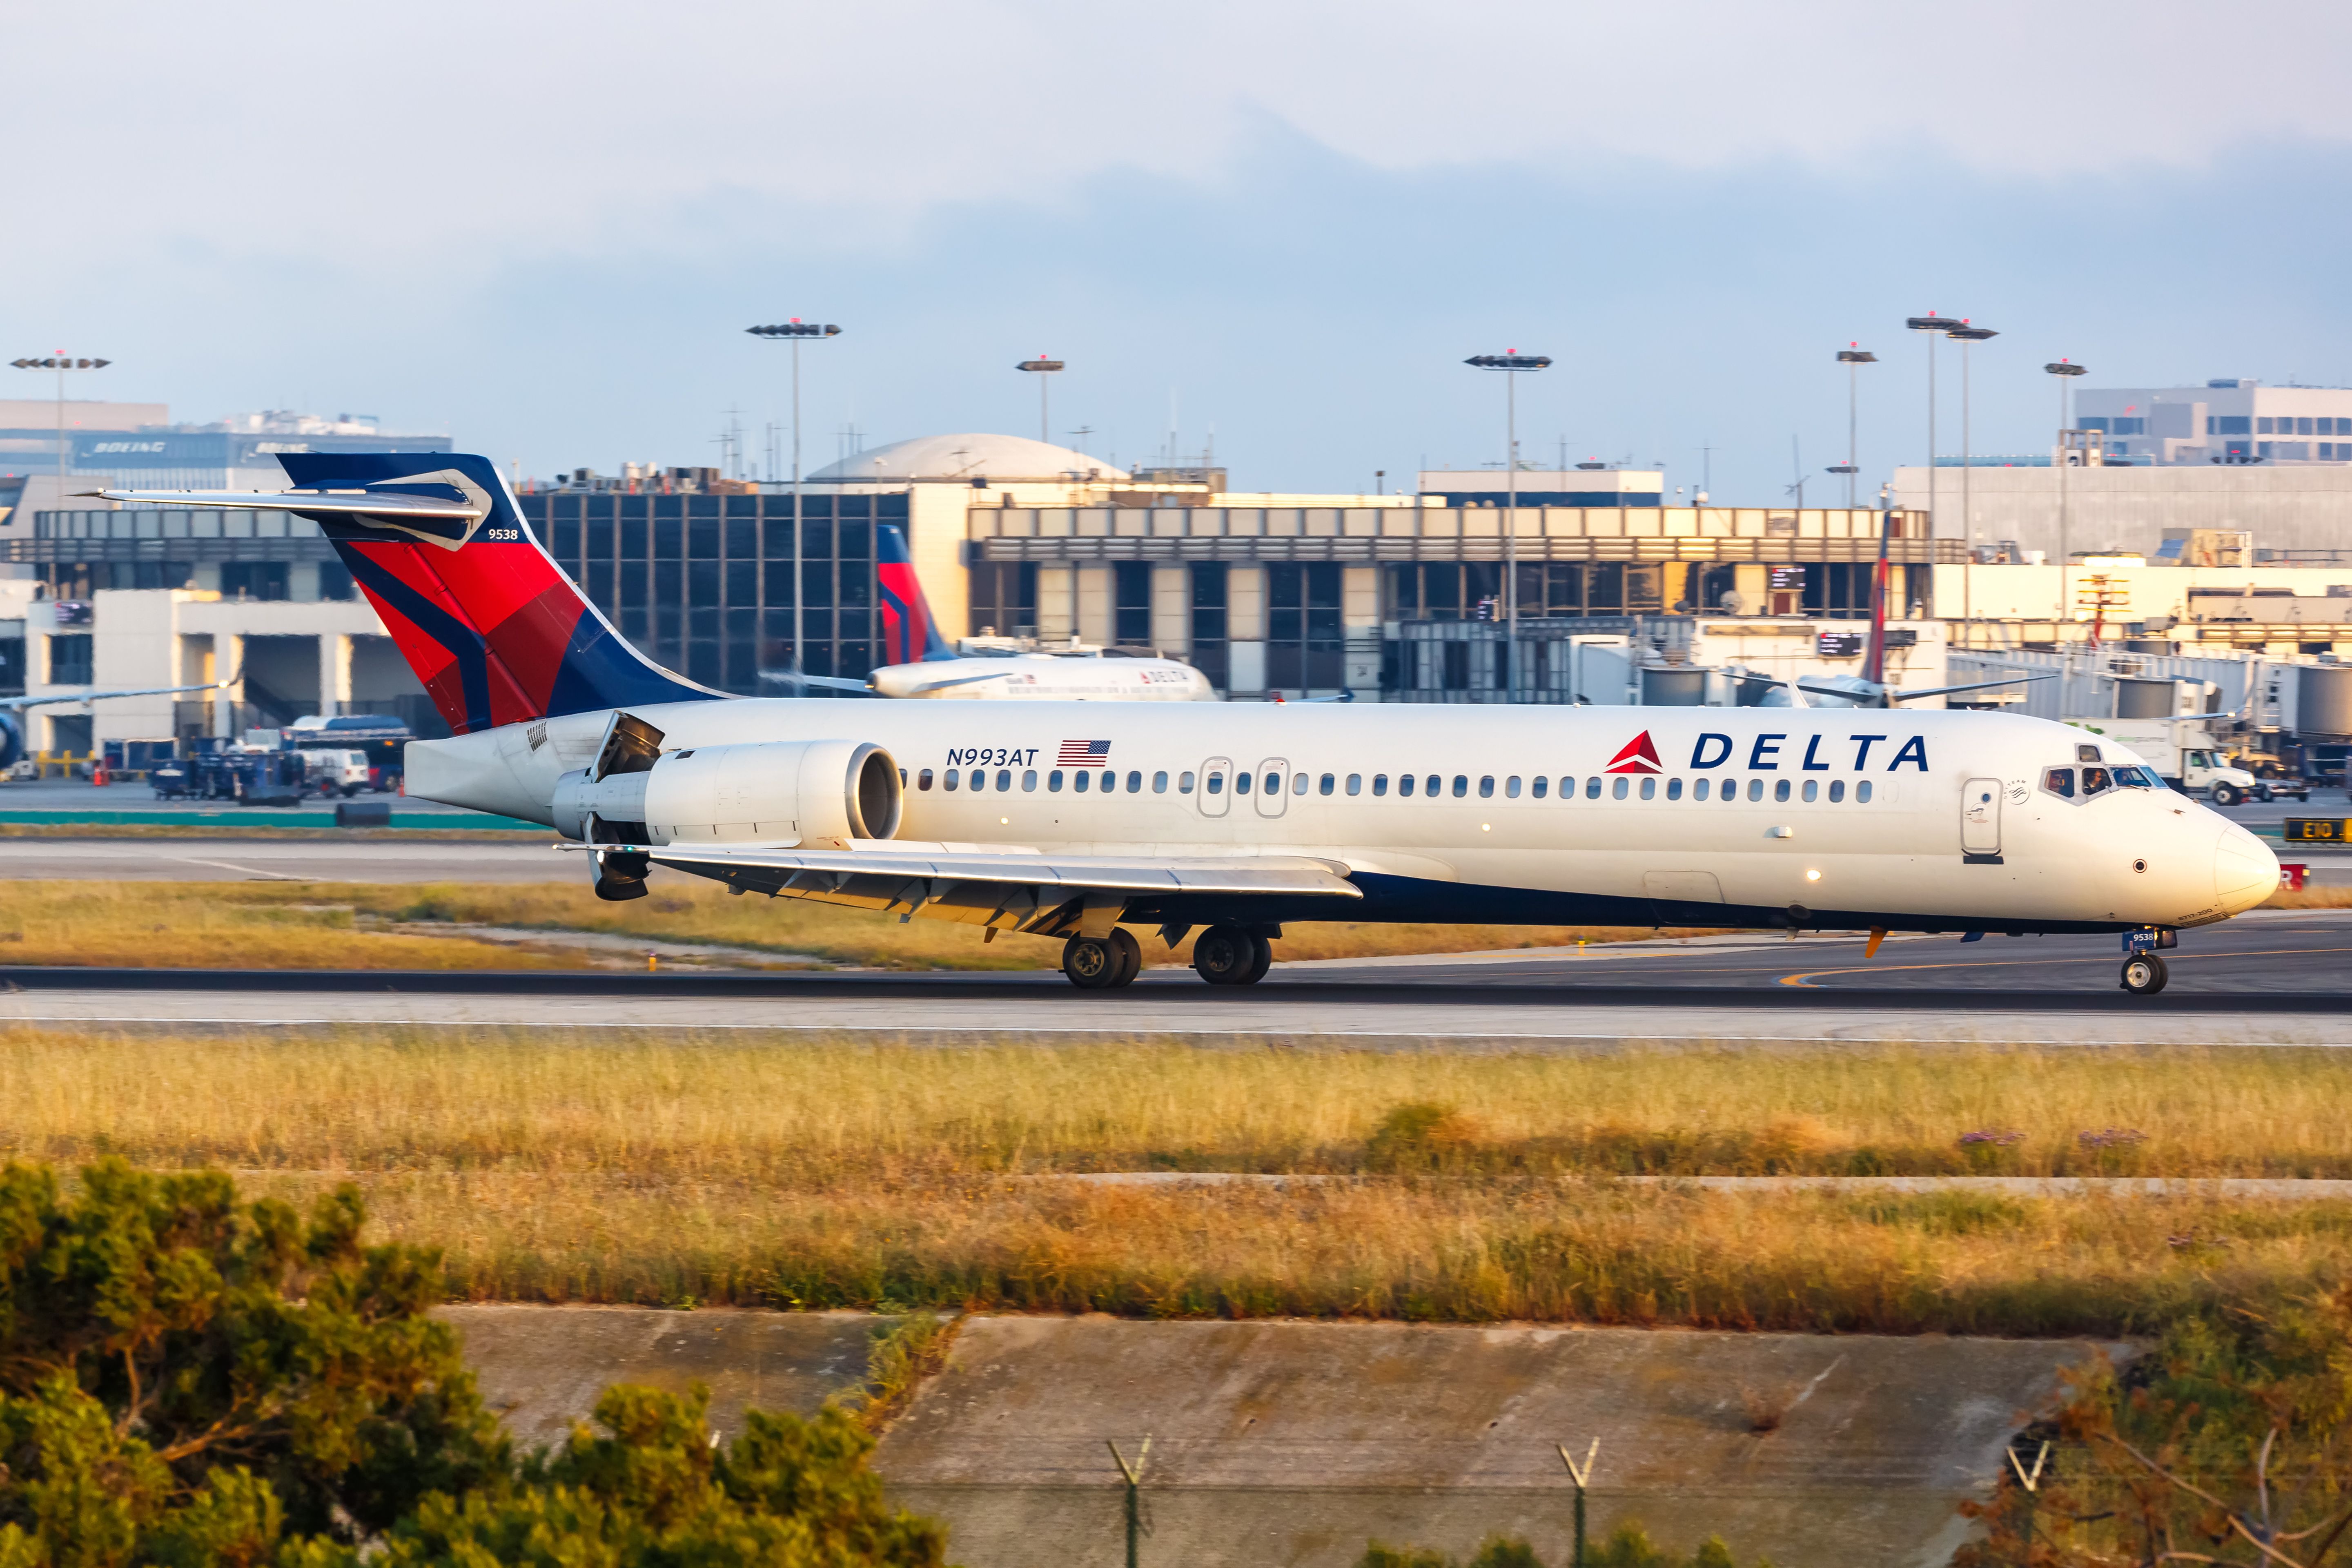 A Delta Air Lines Boeing 717 on an airport apron.